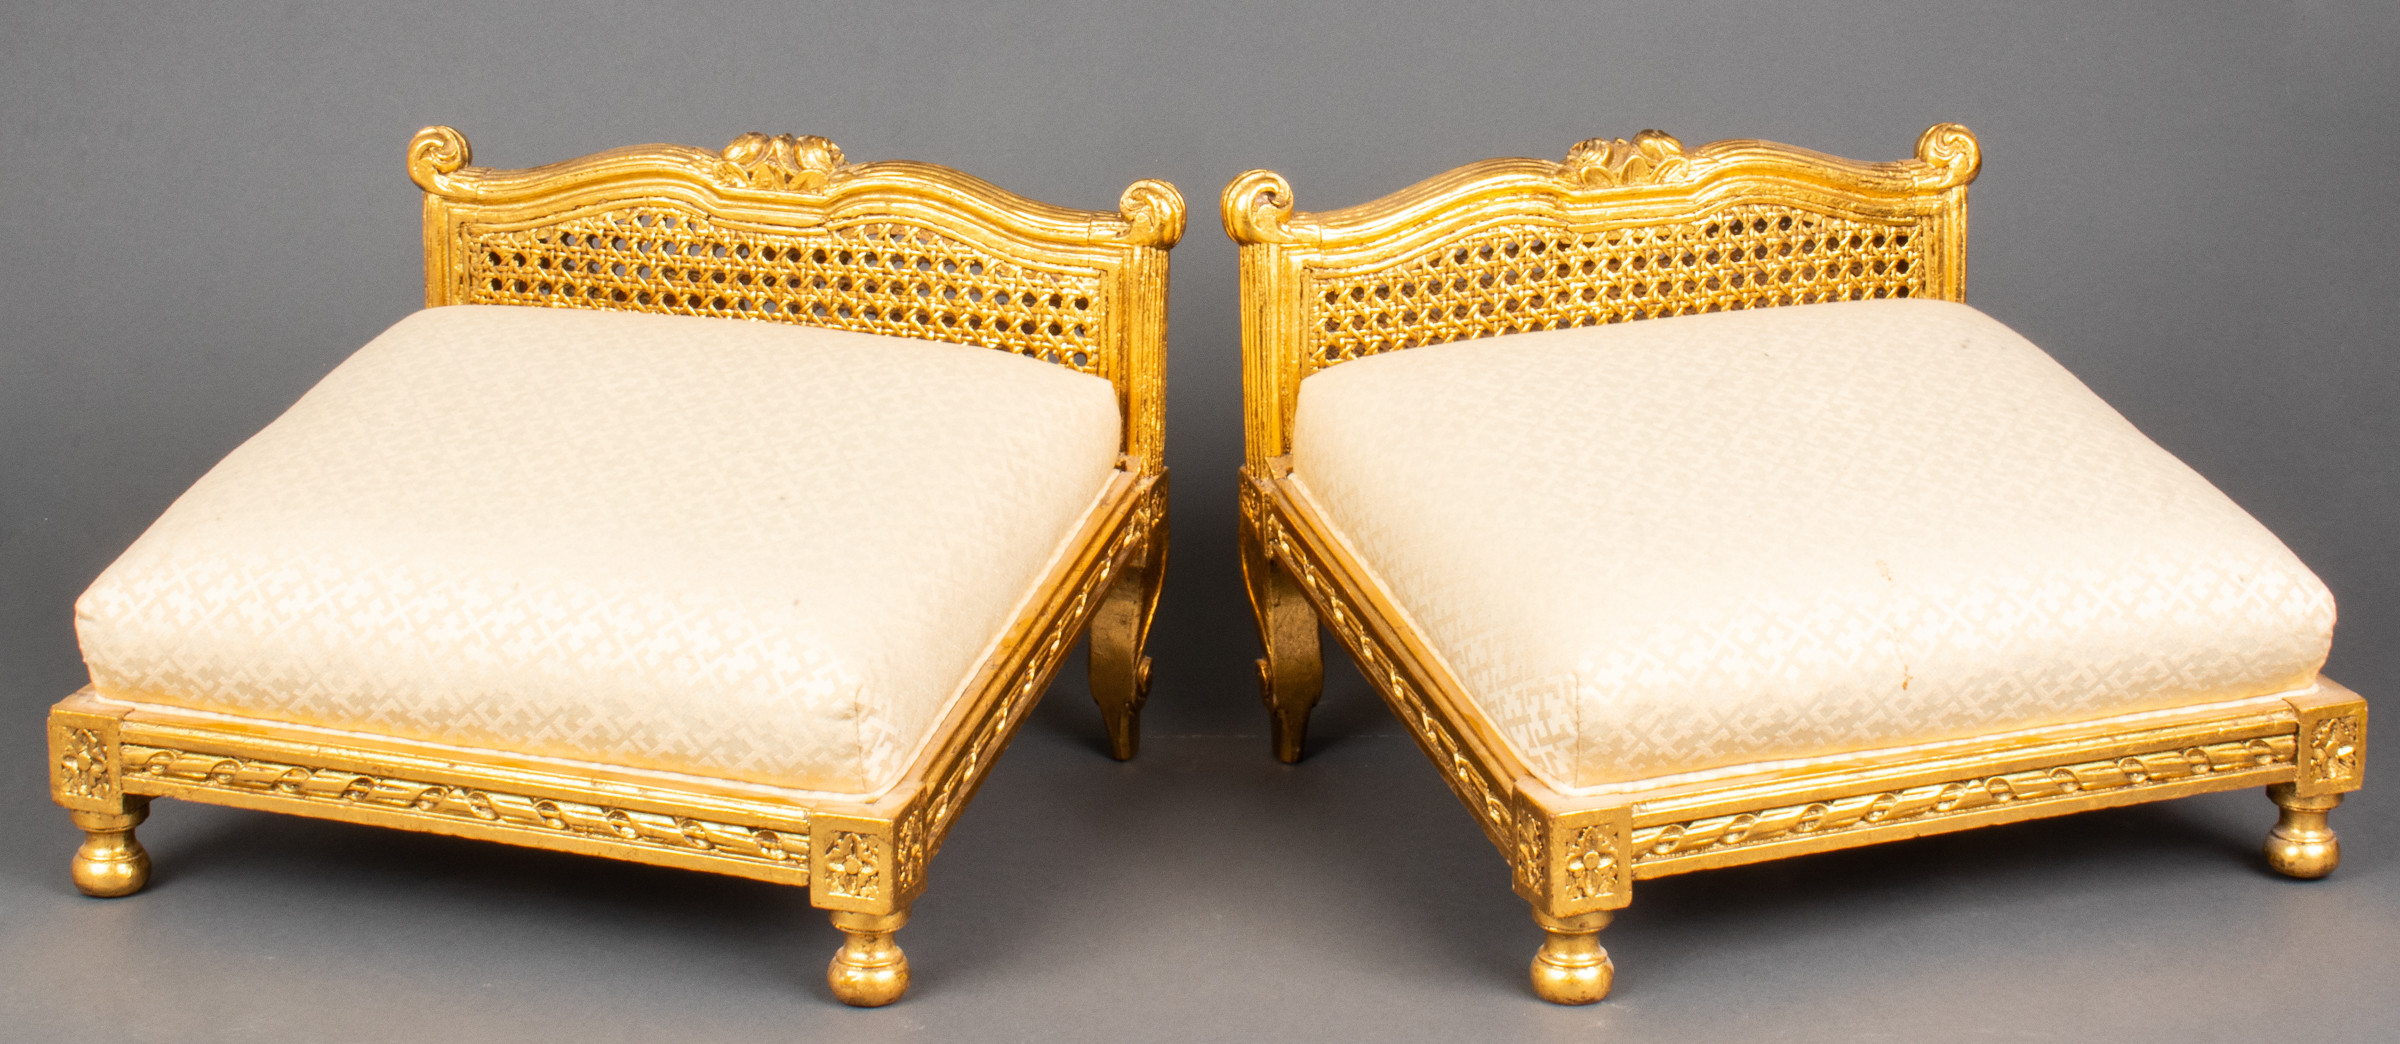 LOUIS XV STYLE CANED GILTWOOD TABOURETS  3c34ad